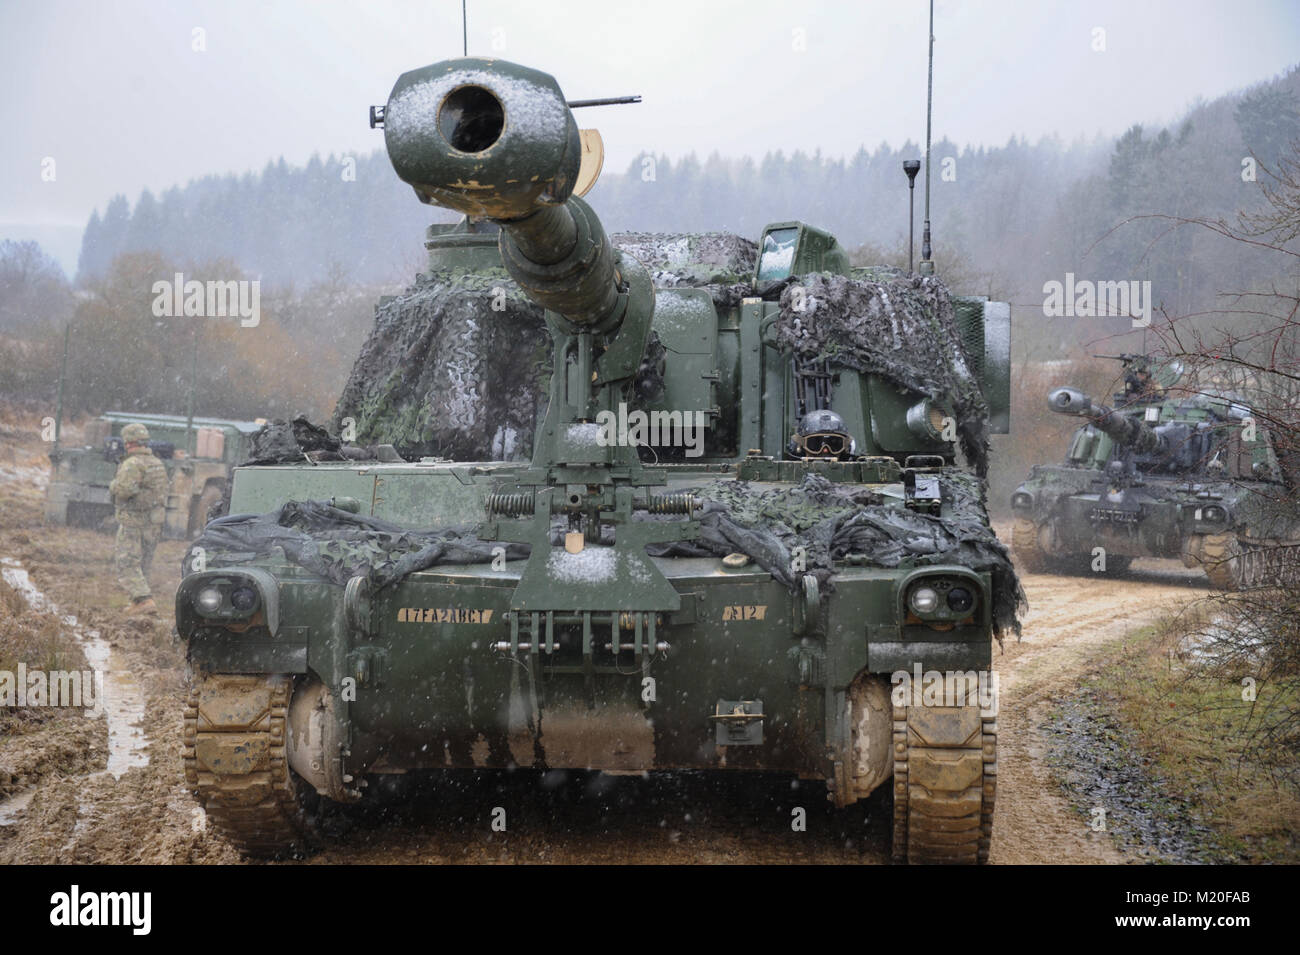 U.S. Soldiers with Battery A, 1st Battalion, 7th Field Artillery Regiment, 2nd Armored Brigade Combat Team, 1st Infantry Division, maneuver a M109A6 Paladin howitzer in preparation for a live fire exercise at the 7th Army Training Command's Grafenwoehr Training Area, Feb. 01, 2018. The rotational deployments of armored brigade combat teams are a tangible expression of U.S. commitment to strengthening the defensive and deterrent capabilities of the NATO alliance.  (U.S. Army photo by Markus Rauchenberger) Stock Photo